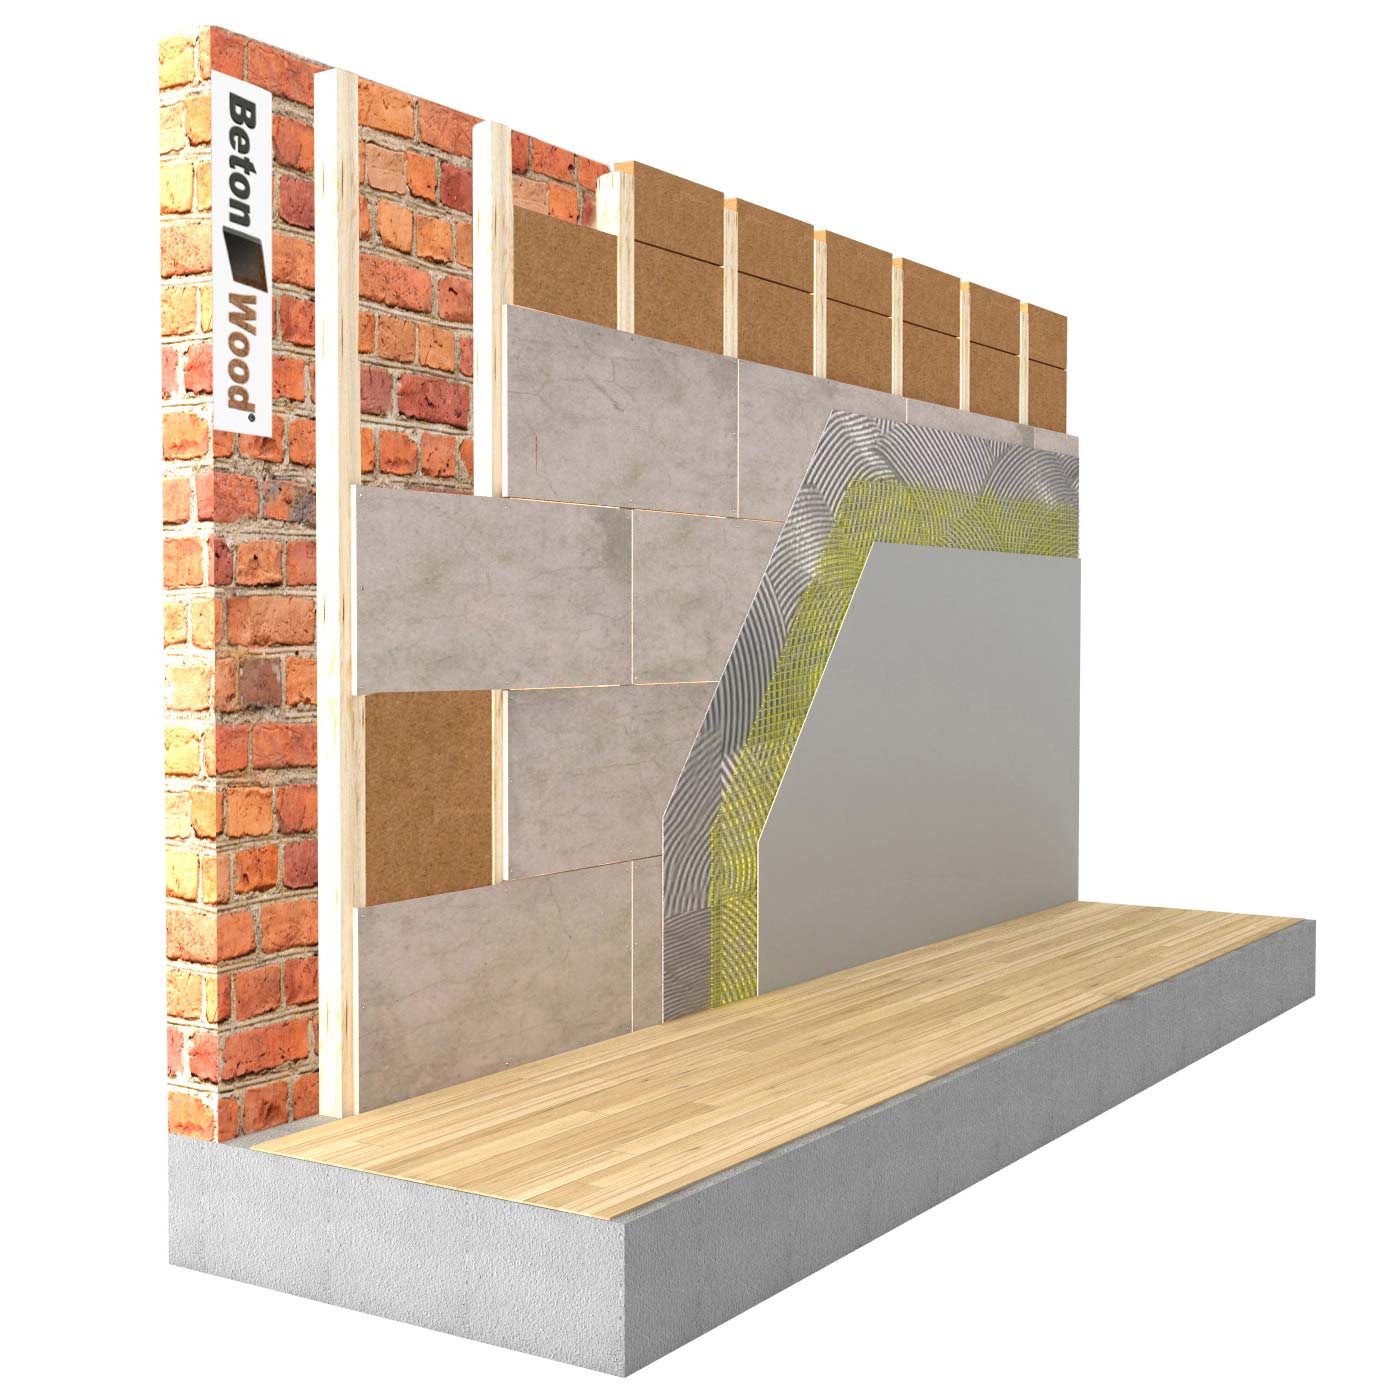 Internal insulation system in Protect dry Fiber wood and cement bonded particle board